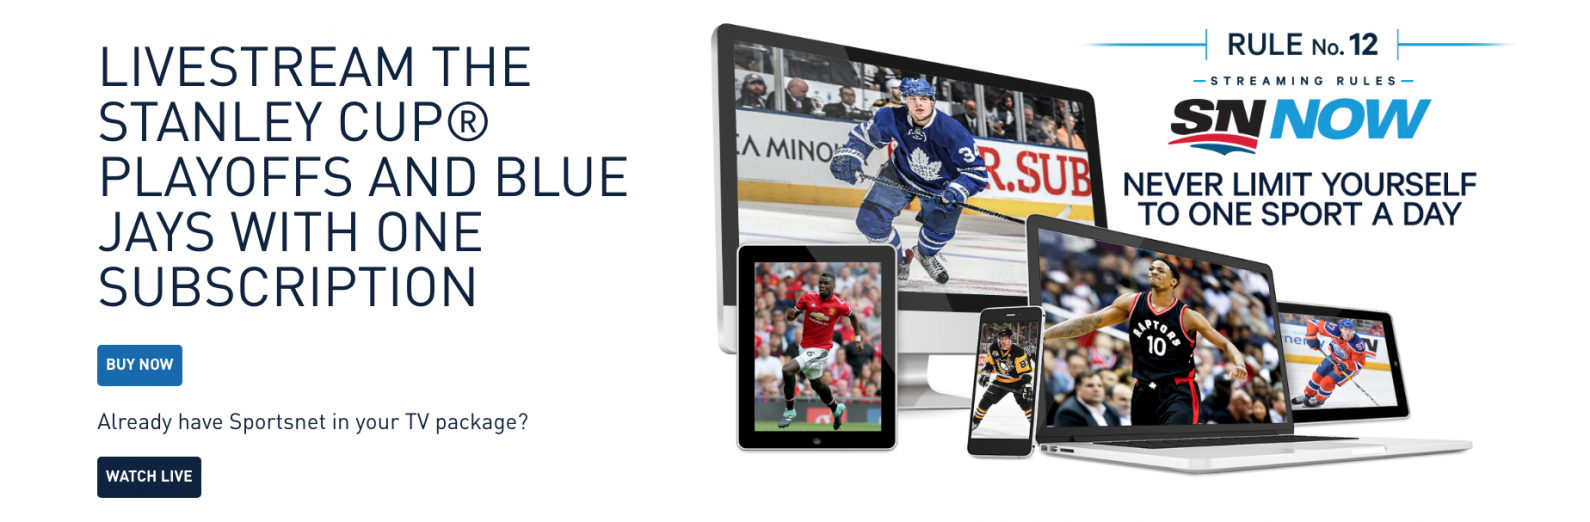 Live Stream the NHL Playoffs 2020 and Stanley Cup Finals on Your Apple Device without Cable